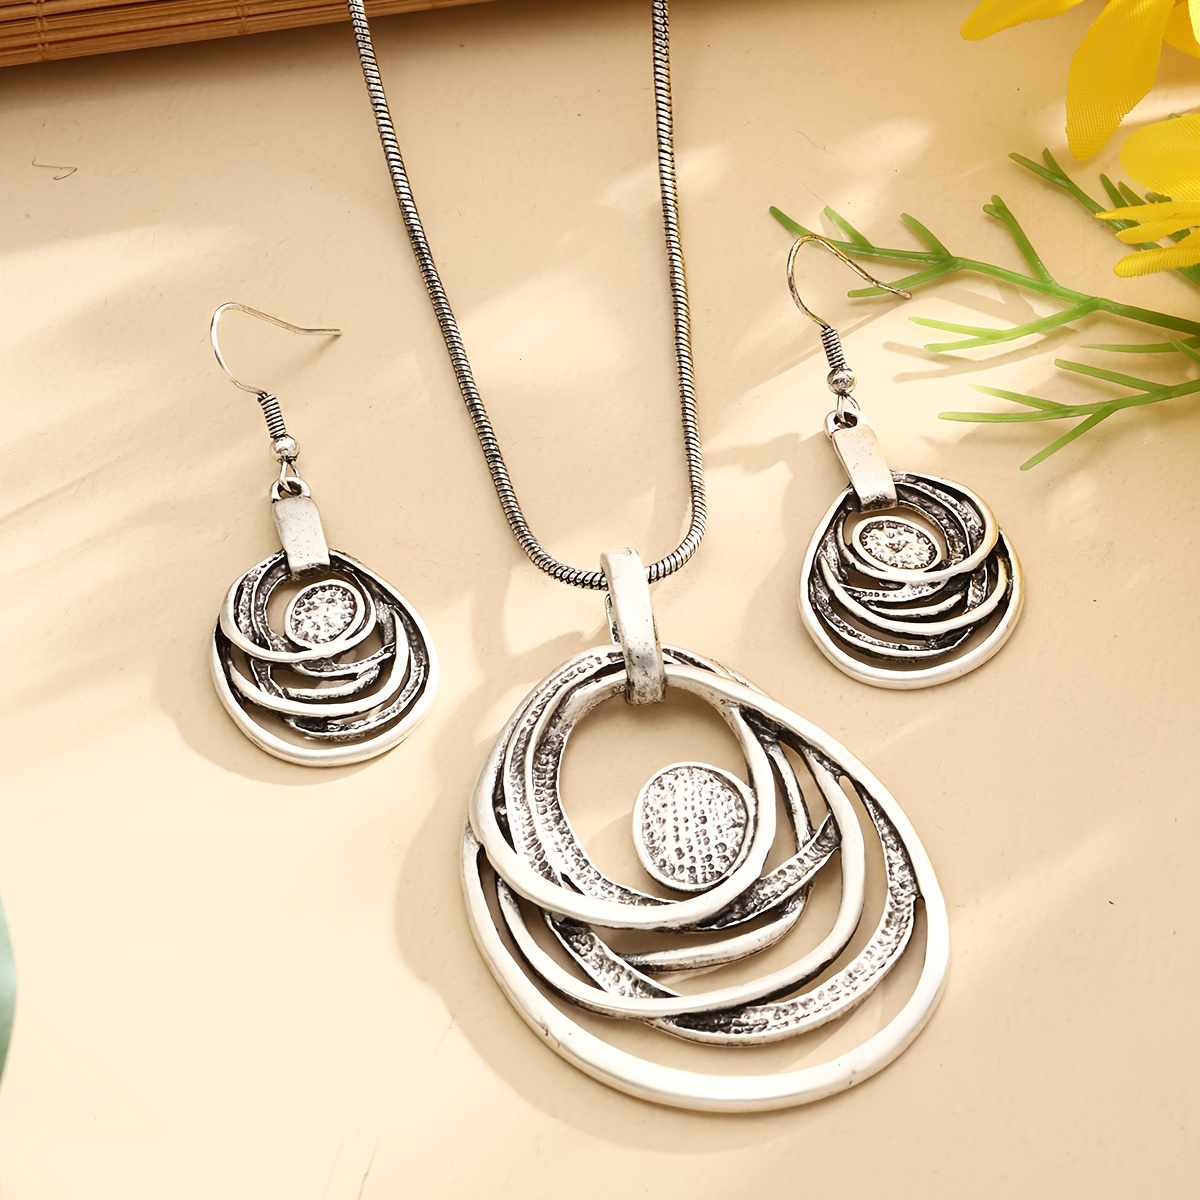 

1 Pair Dangle Earrings +1 Pc Necklace Zinc Alloy Jewelry Set With Multi Layer Circle Design Vintage Bohemian Style Original Design Jewelry Set